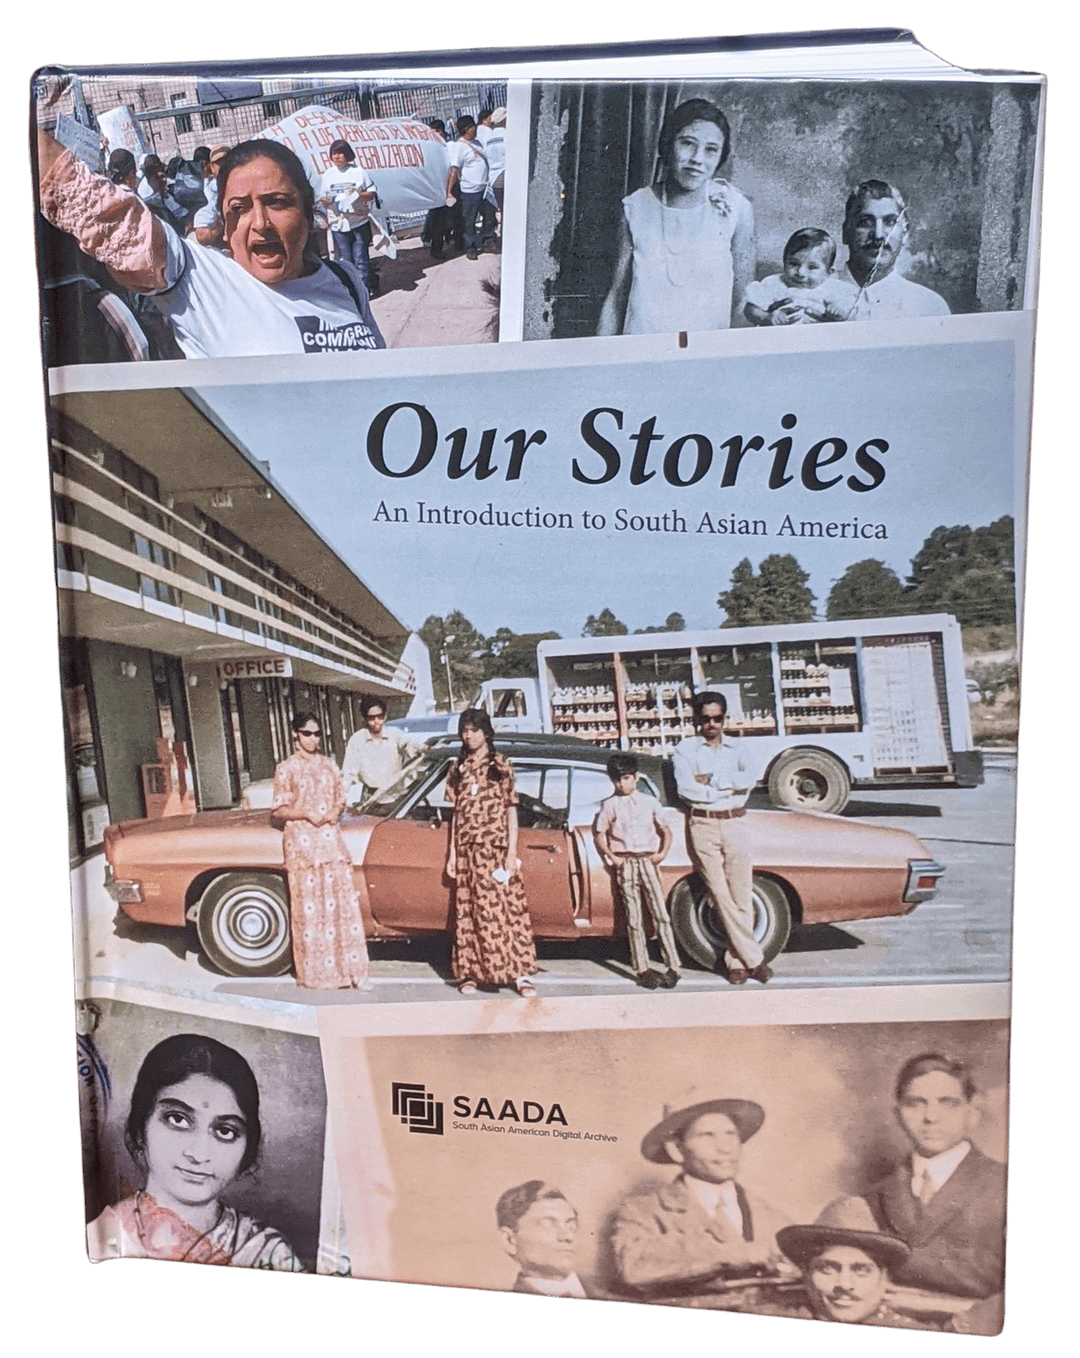 The cover of "Our Stories: An Introduction to South Asian America" laid over a collage of three images: one portrait of a South Asian woman looking directly at the camera, one family photo with five figures posed in front of a car, and one faded group photo of South Asian men in suits.